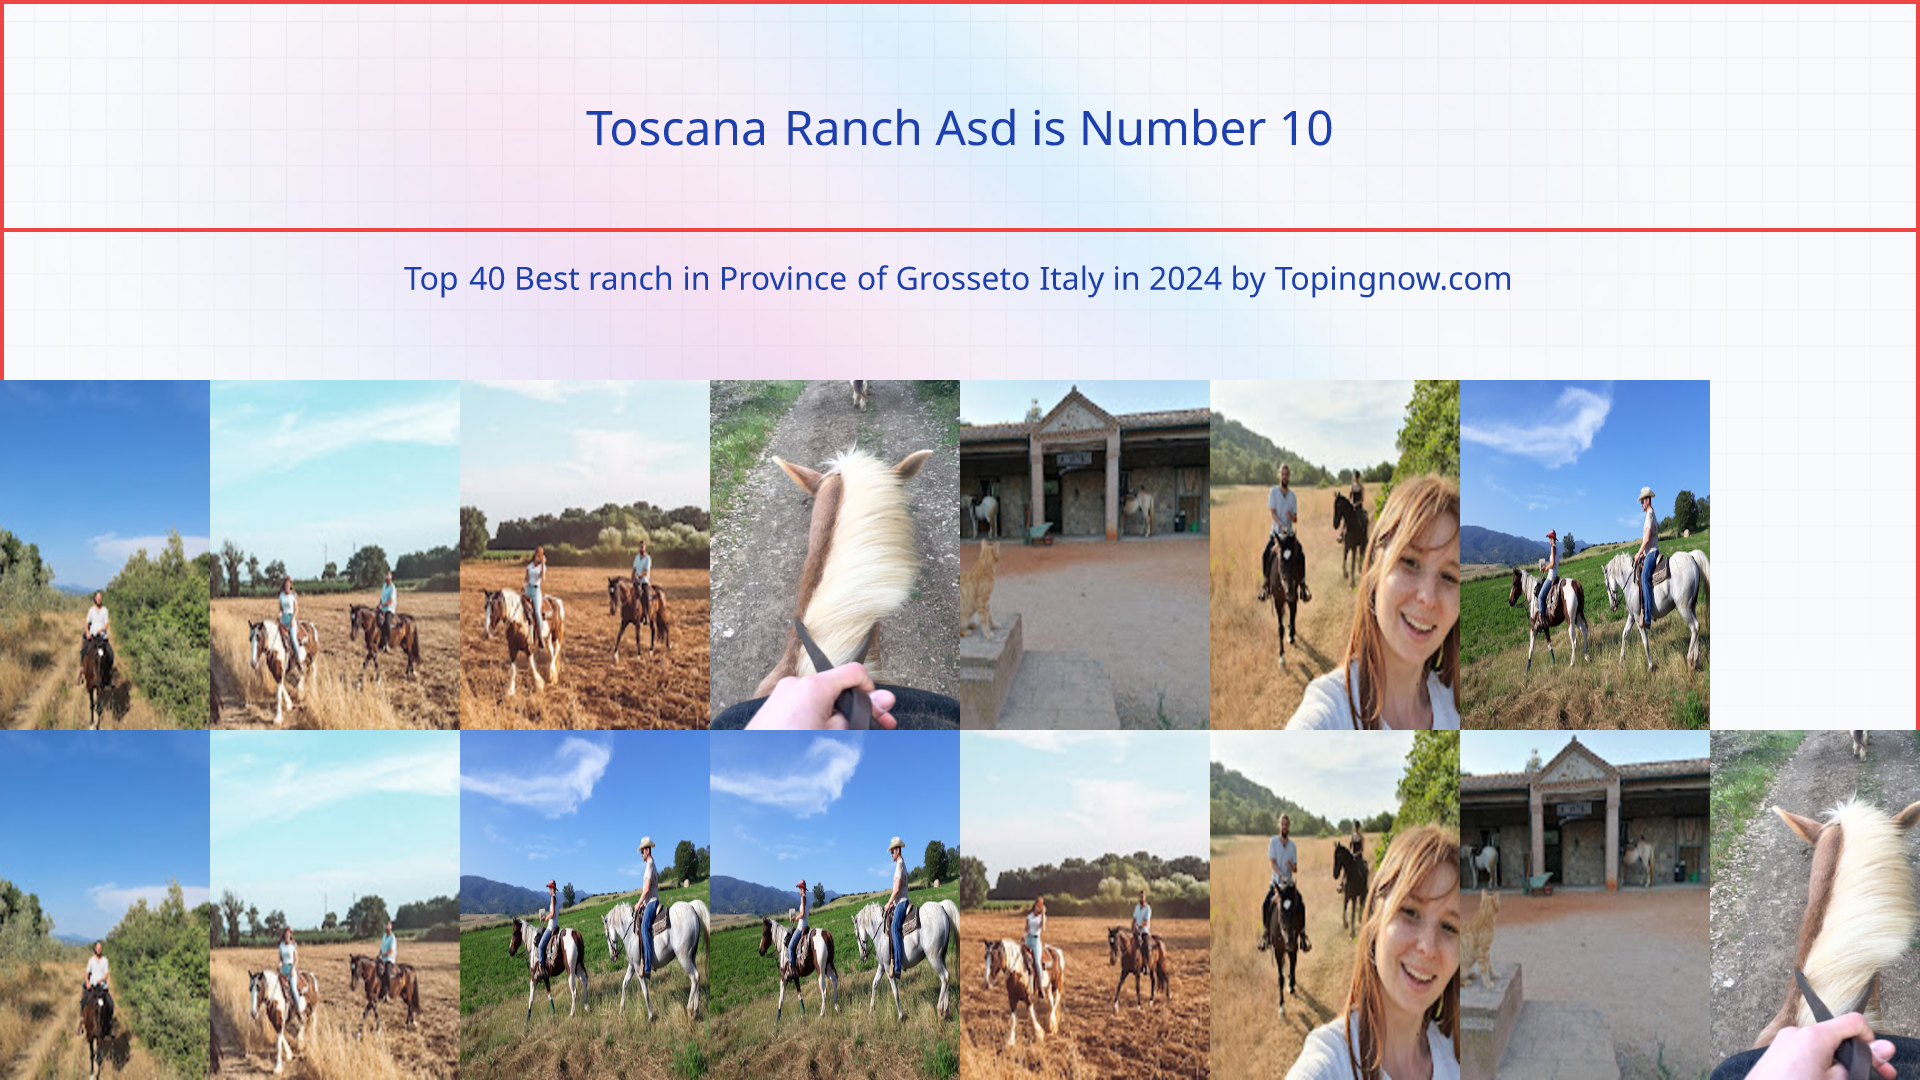 Toscana Ranch Asd: Top 40 Best ranch in Province of Grosseto Italy in 2024